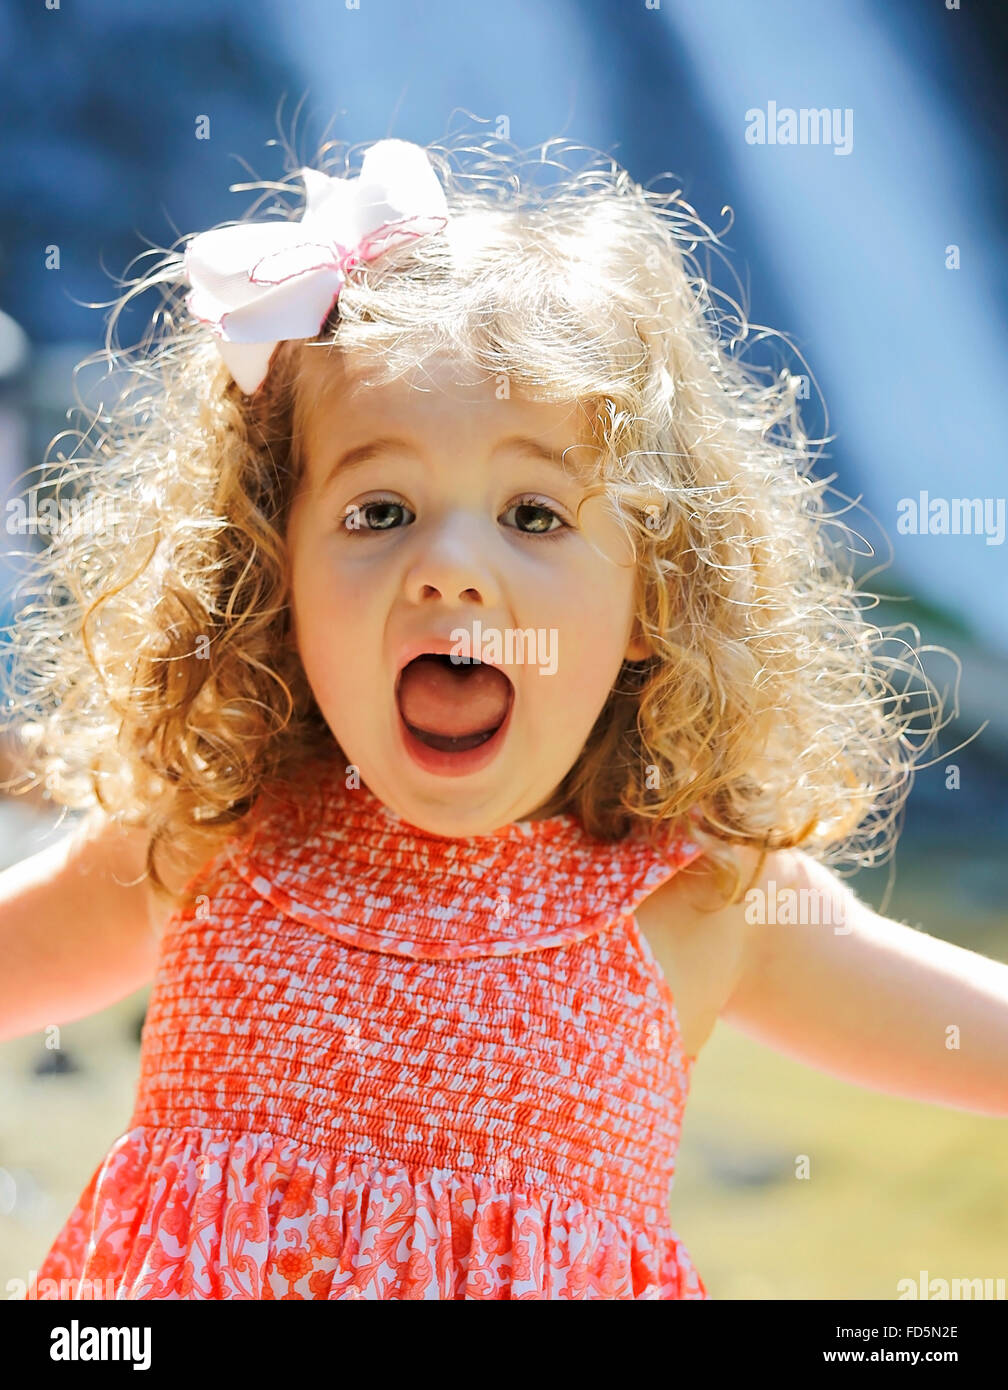 Image of a wild-haired, free-spirited toddler girl screaming with joy. Stock Photo